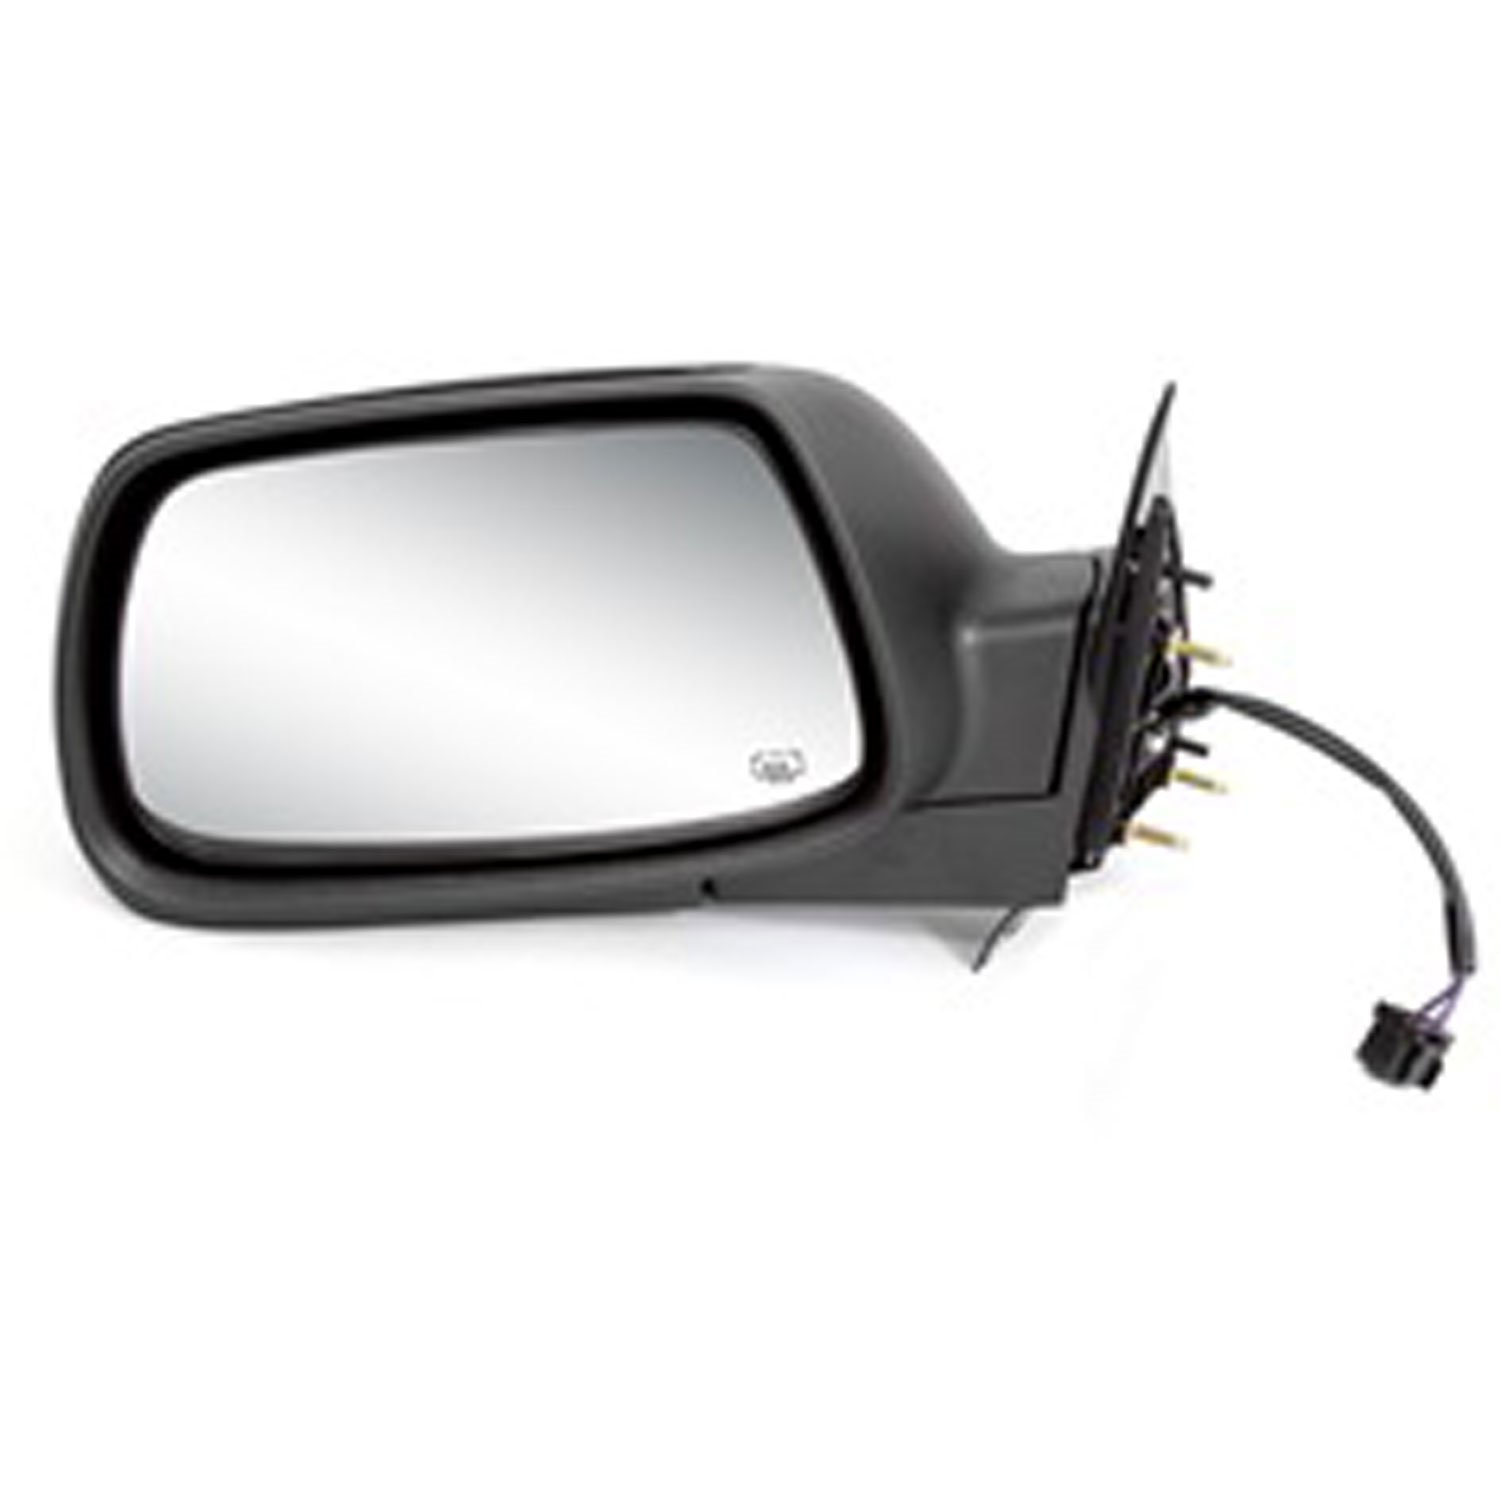 This black folding power door mirror from Omix-ADA is heated and fits the left door on 05-10 Jeep Grand Cherokee WK.